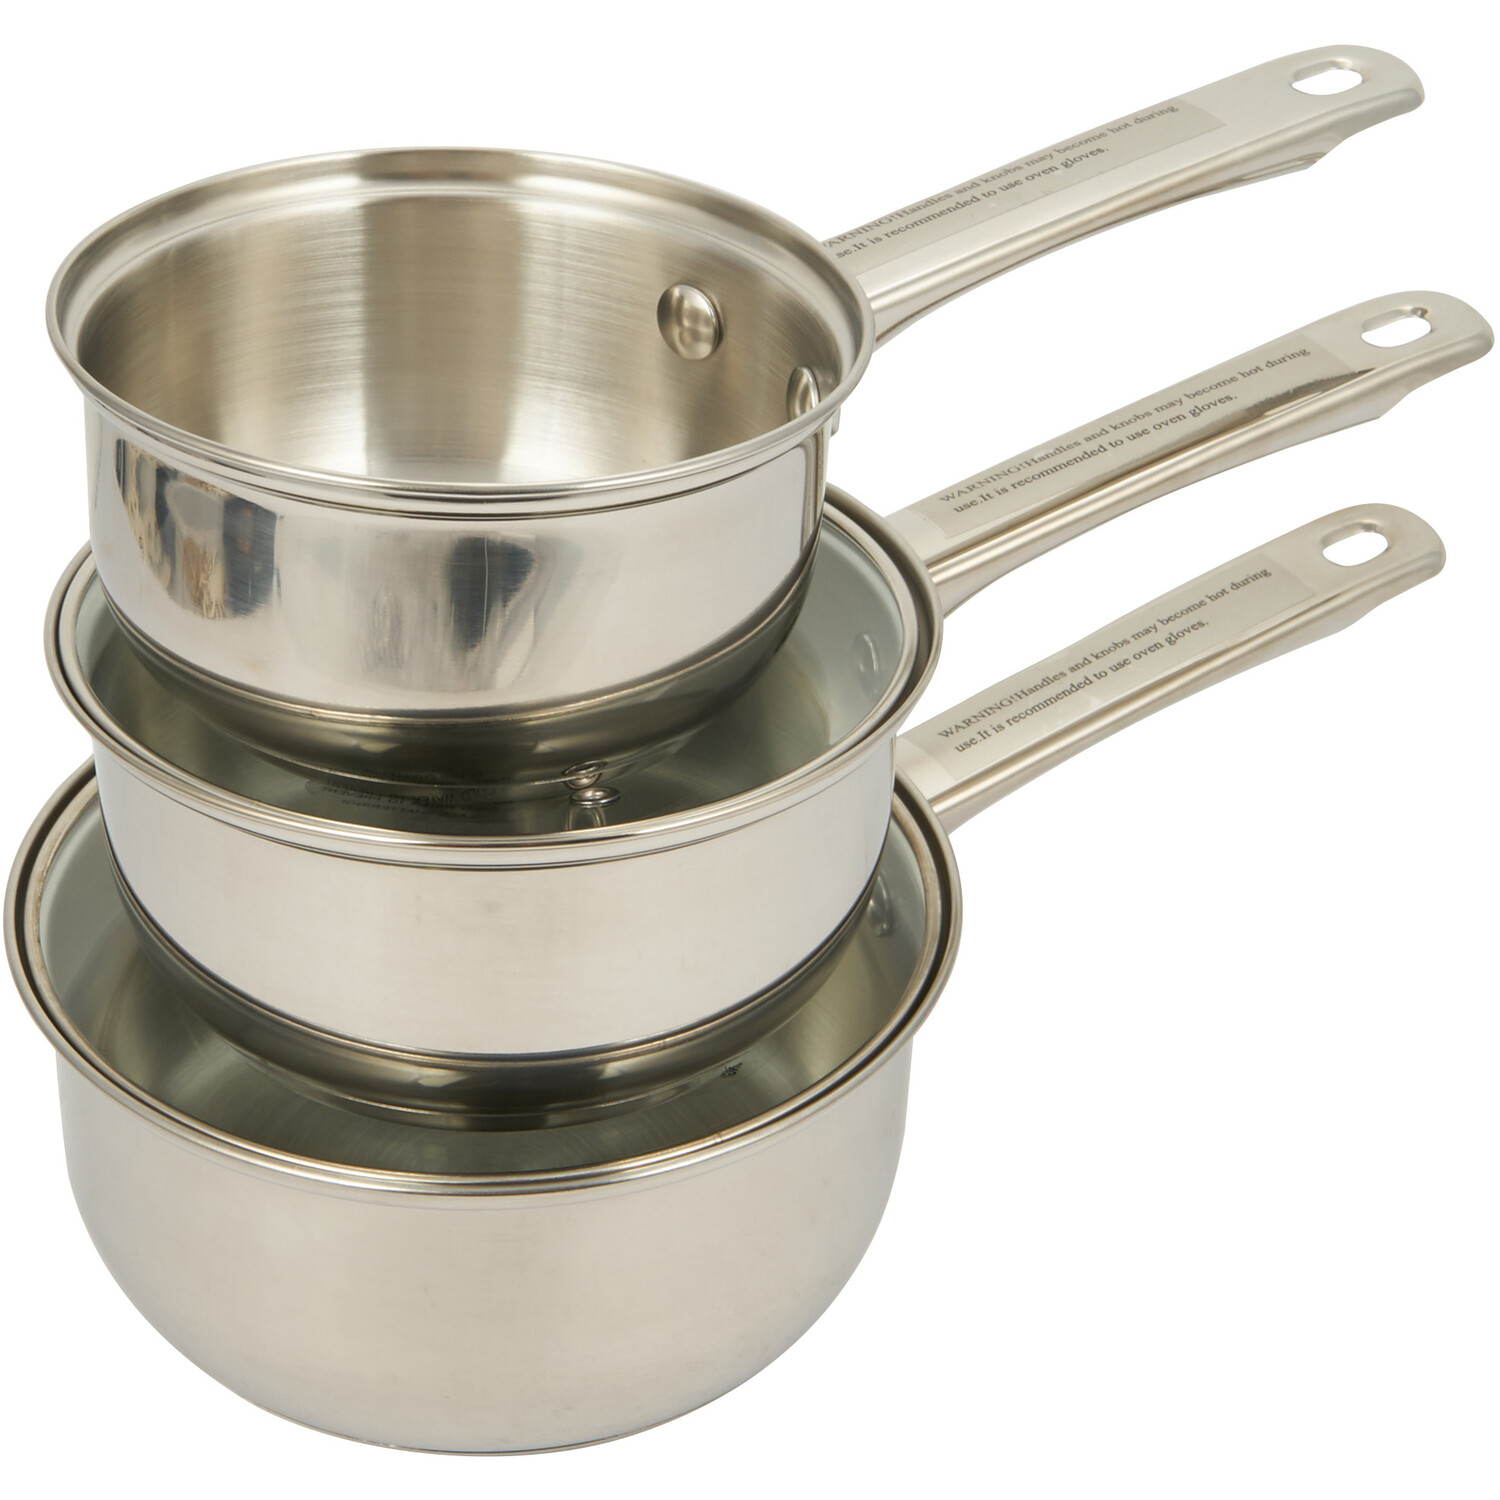 My Kitchen 3 Piece Stainless Steel Cookware Set - Chrome Image 1